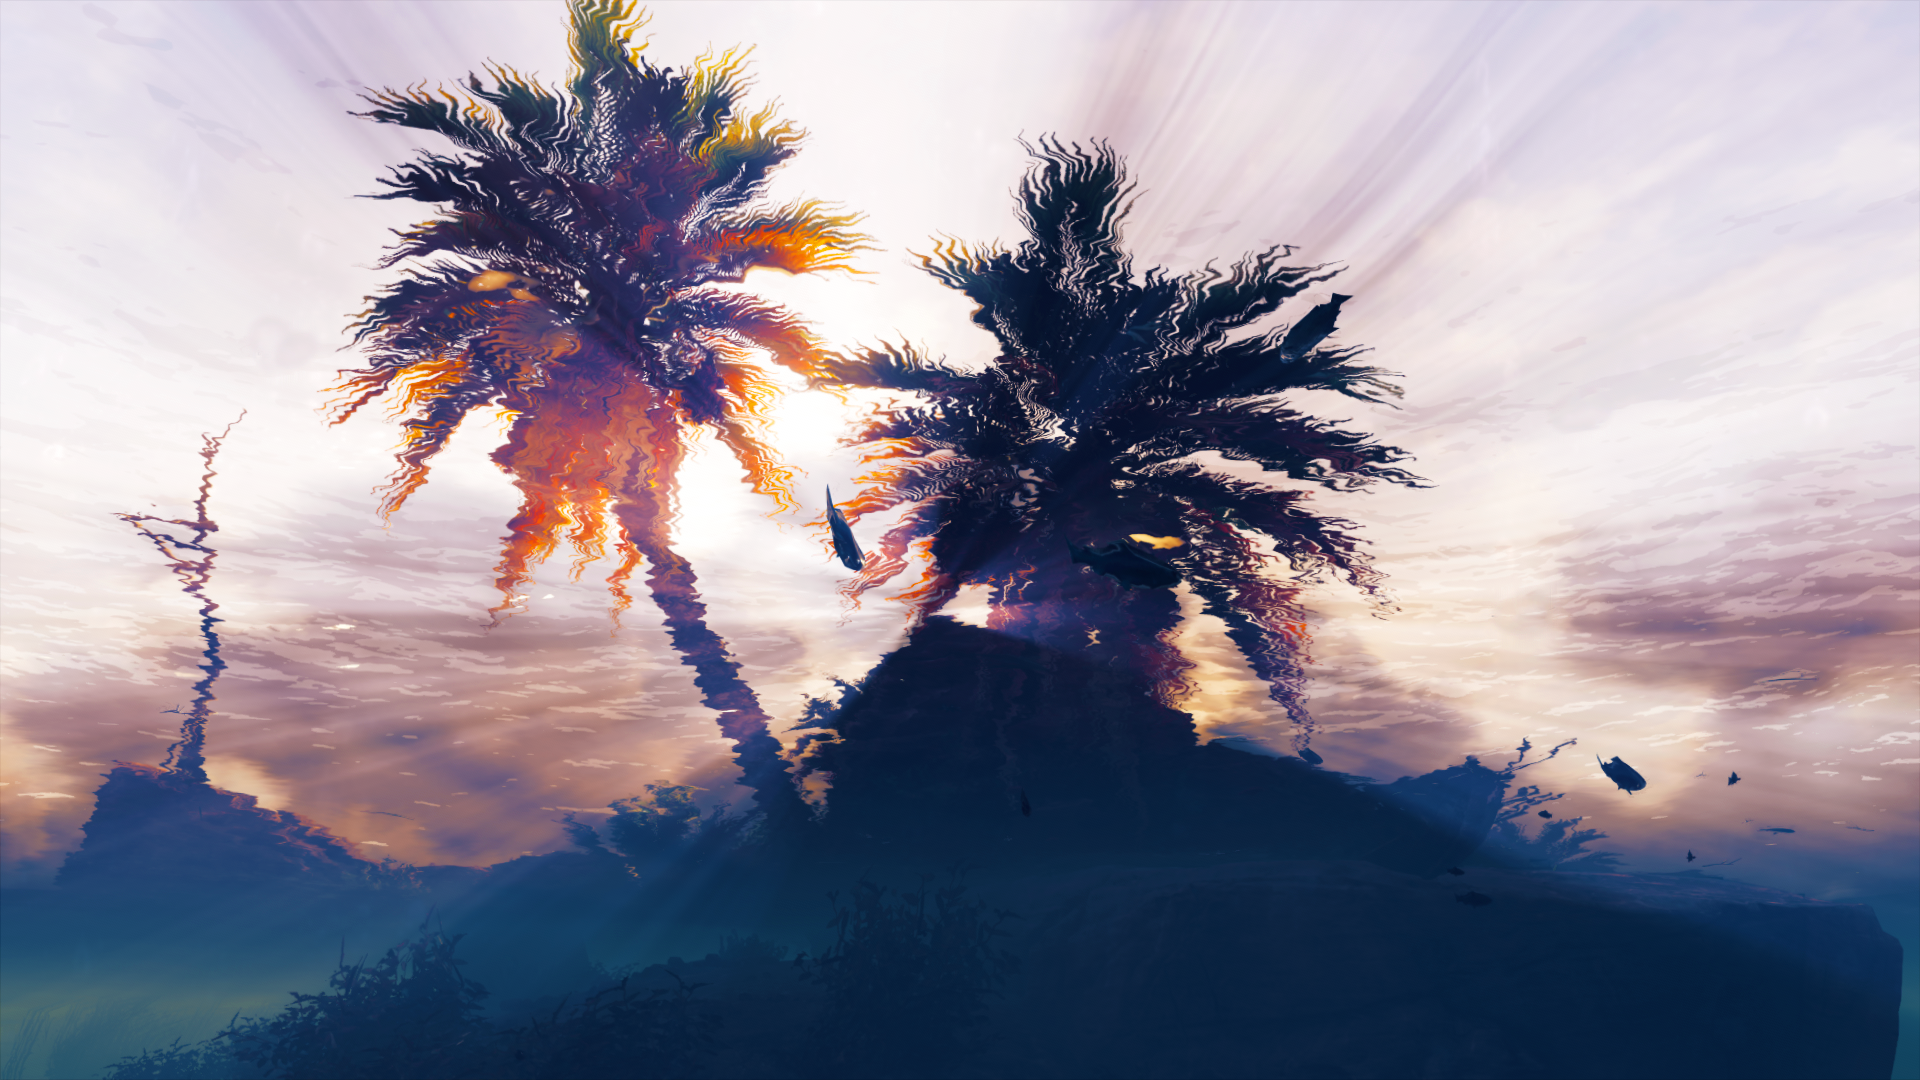 General 1920x1080 video games Assassin's Creed: Origins Assassin's Creed palm trees